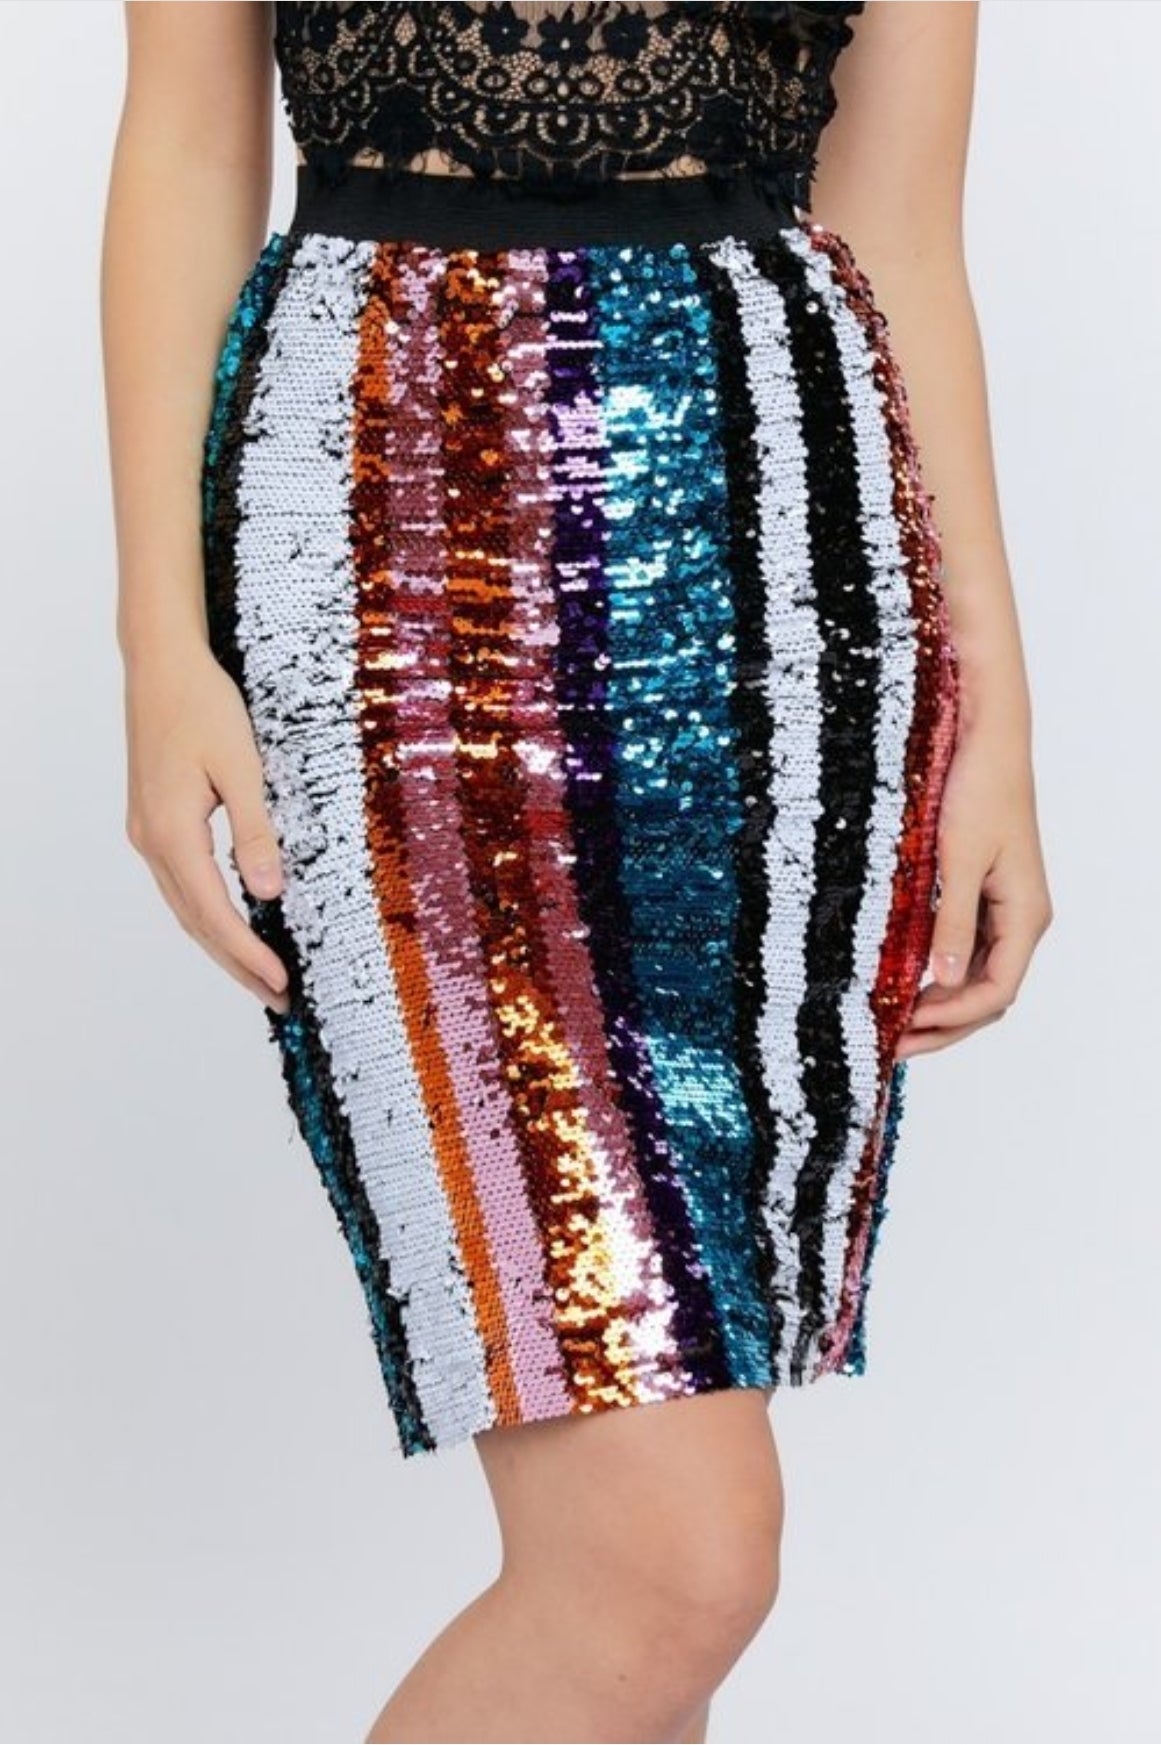 The Party Never Stops Skirt